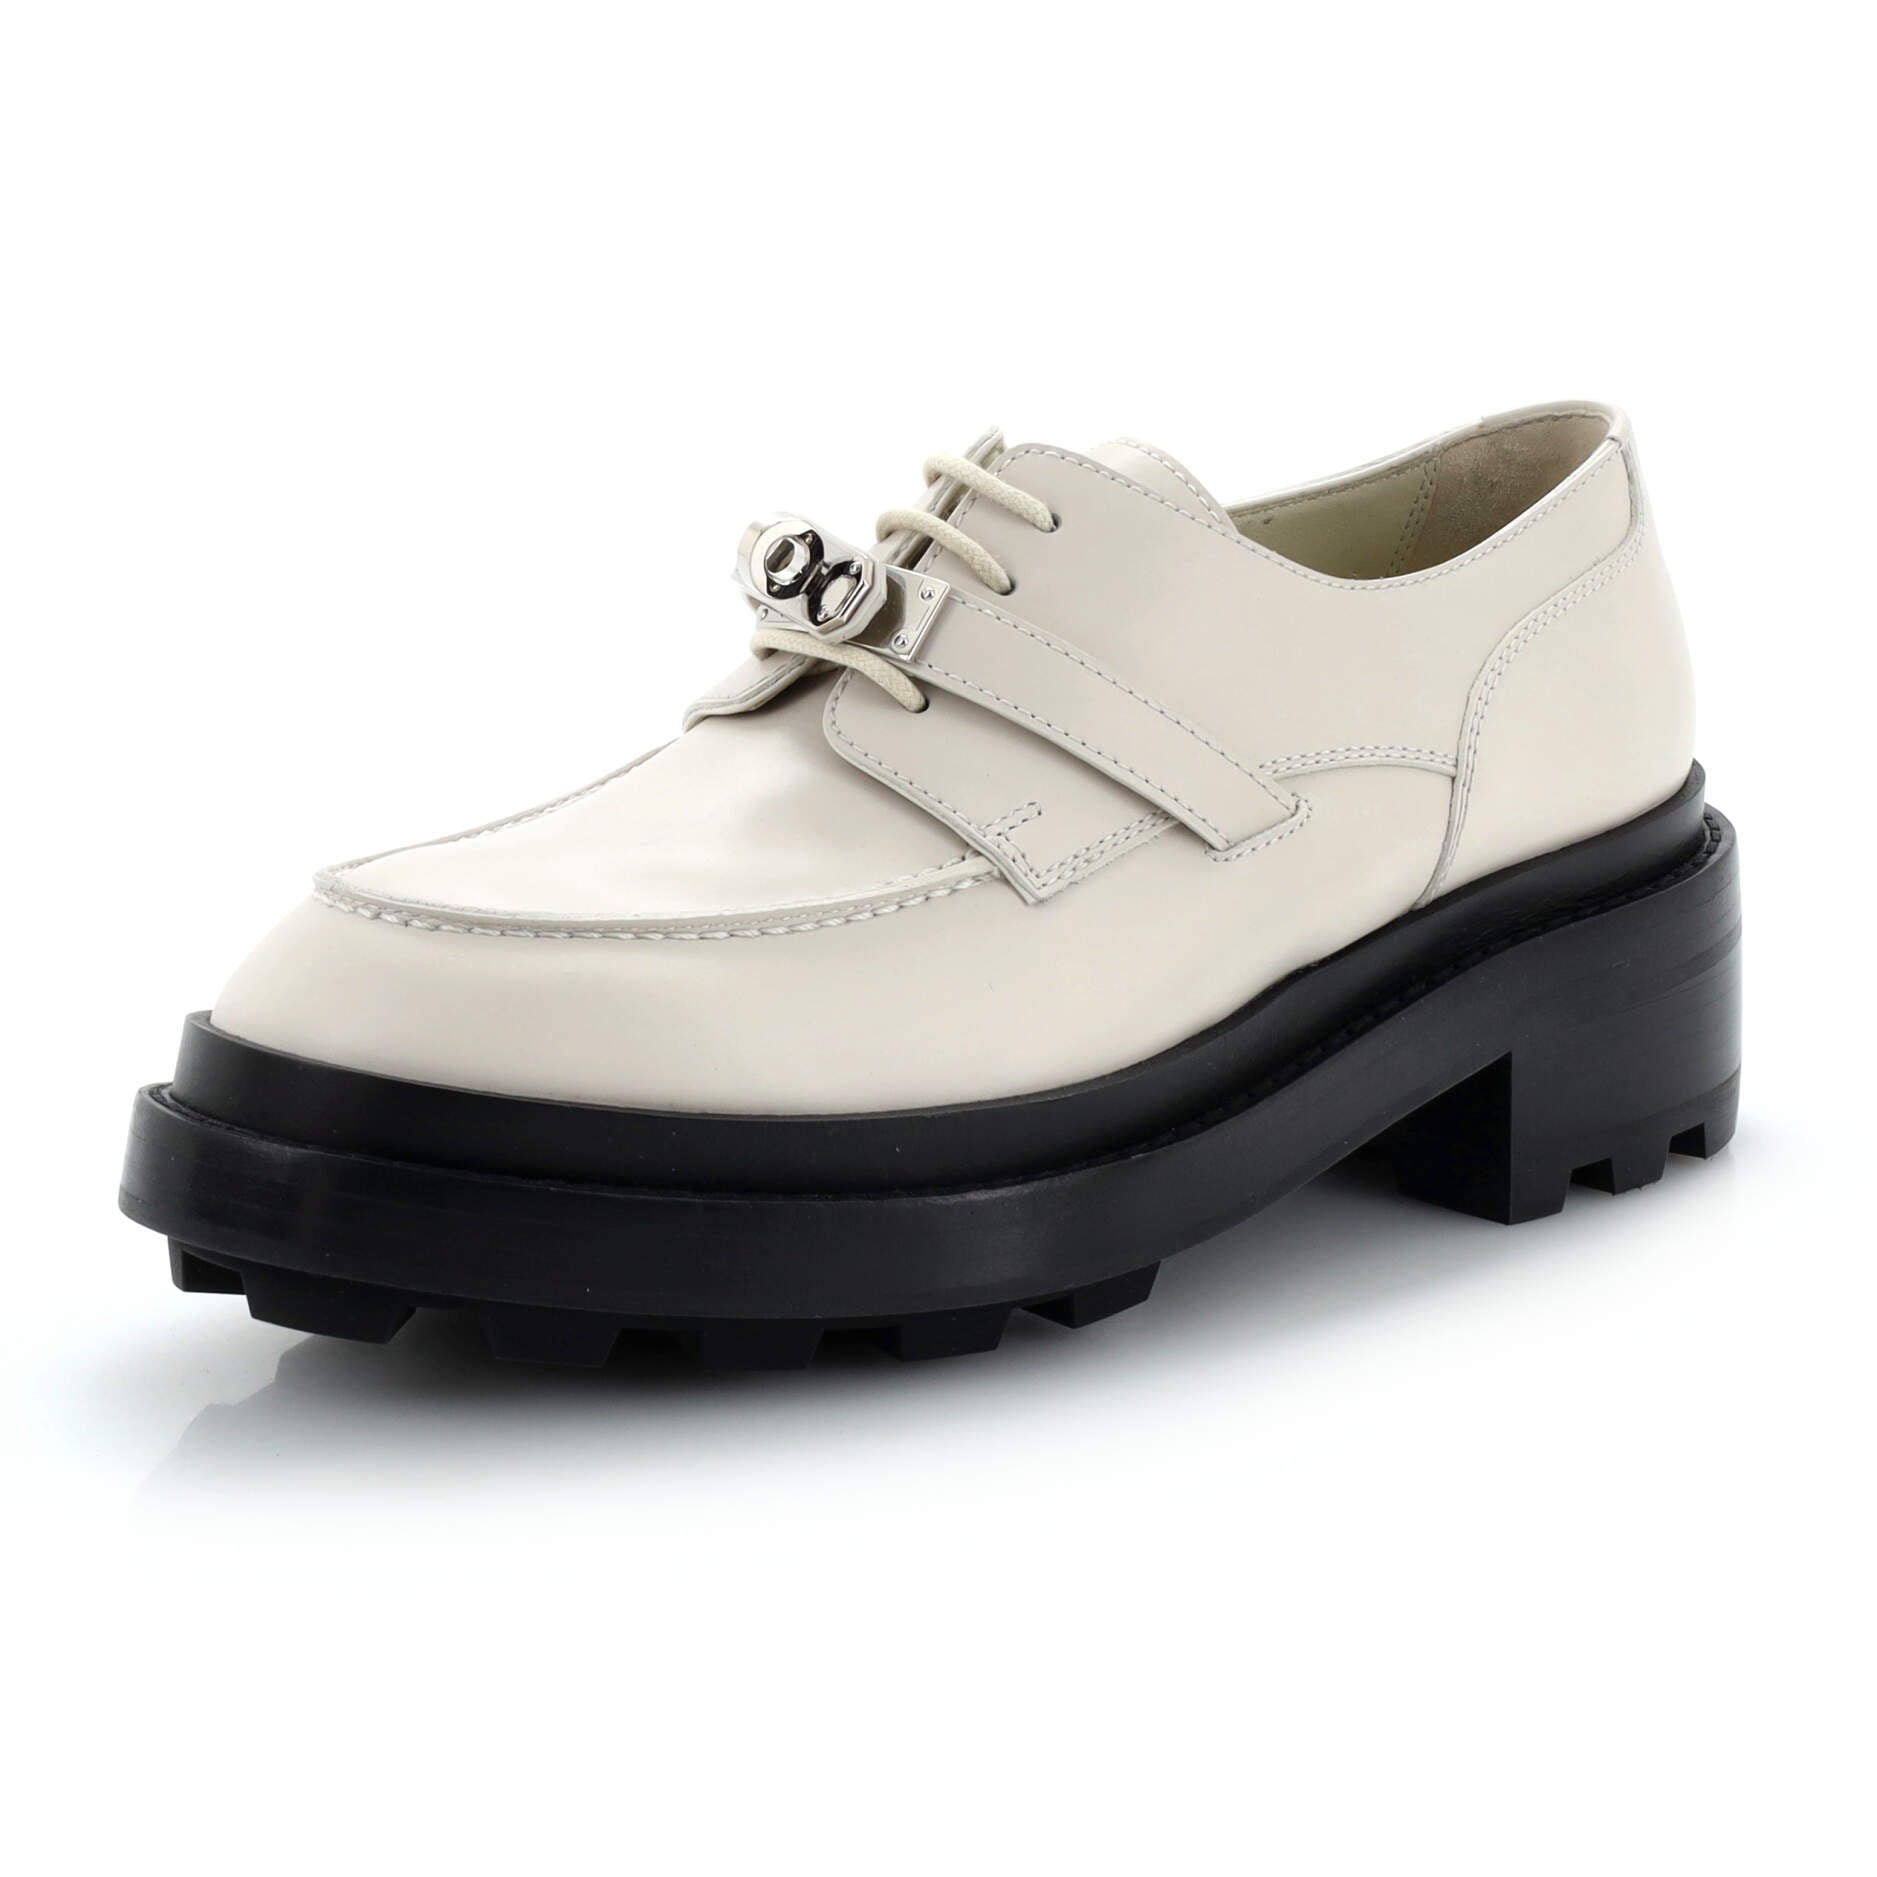 Women's First Oxfords Leather